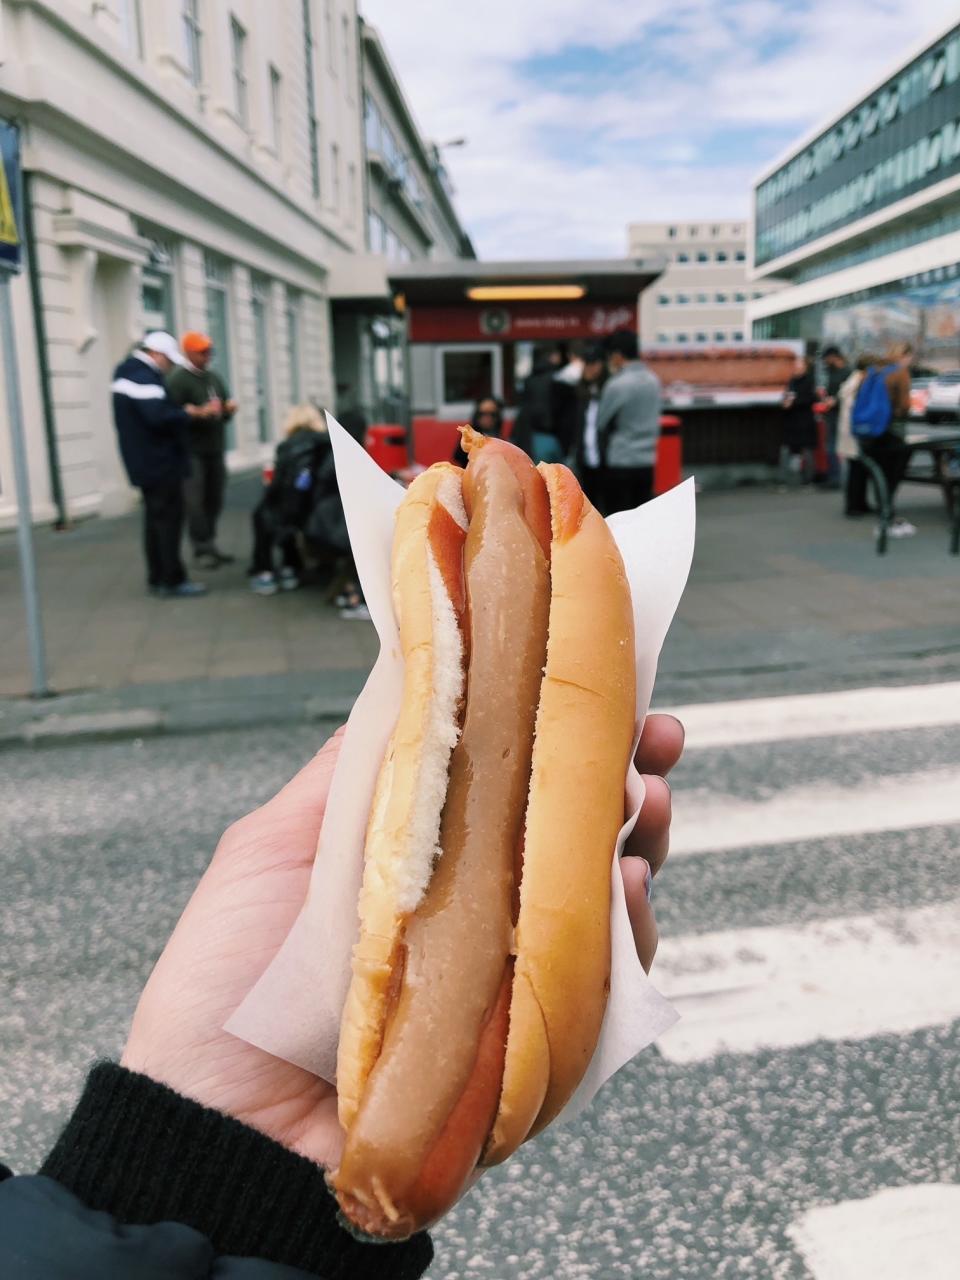 A hot dog from a street cart in Reykjavik